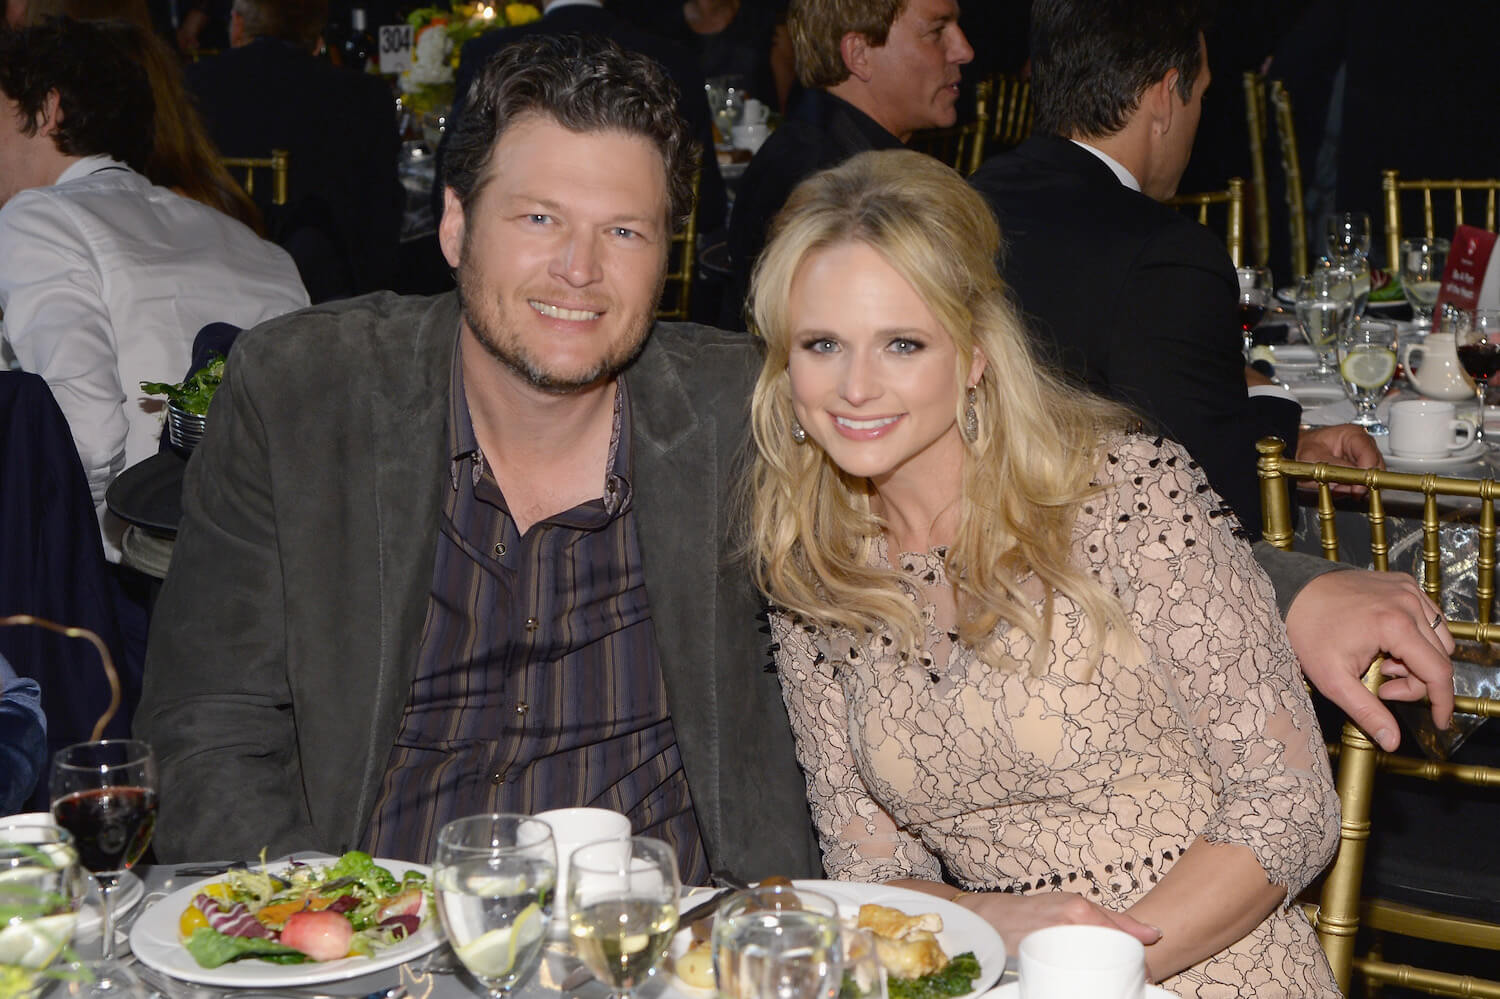 Blake Shelton with his arm around Miranda Lambert. They're smiling with dinner in front of them at a table